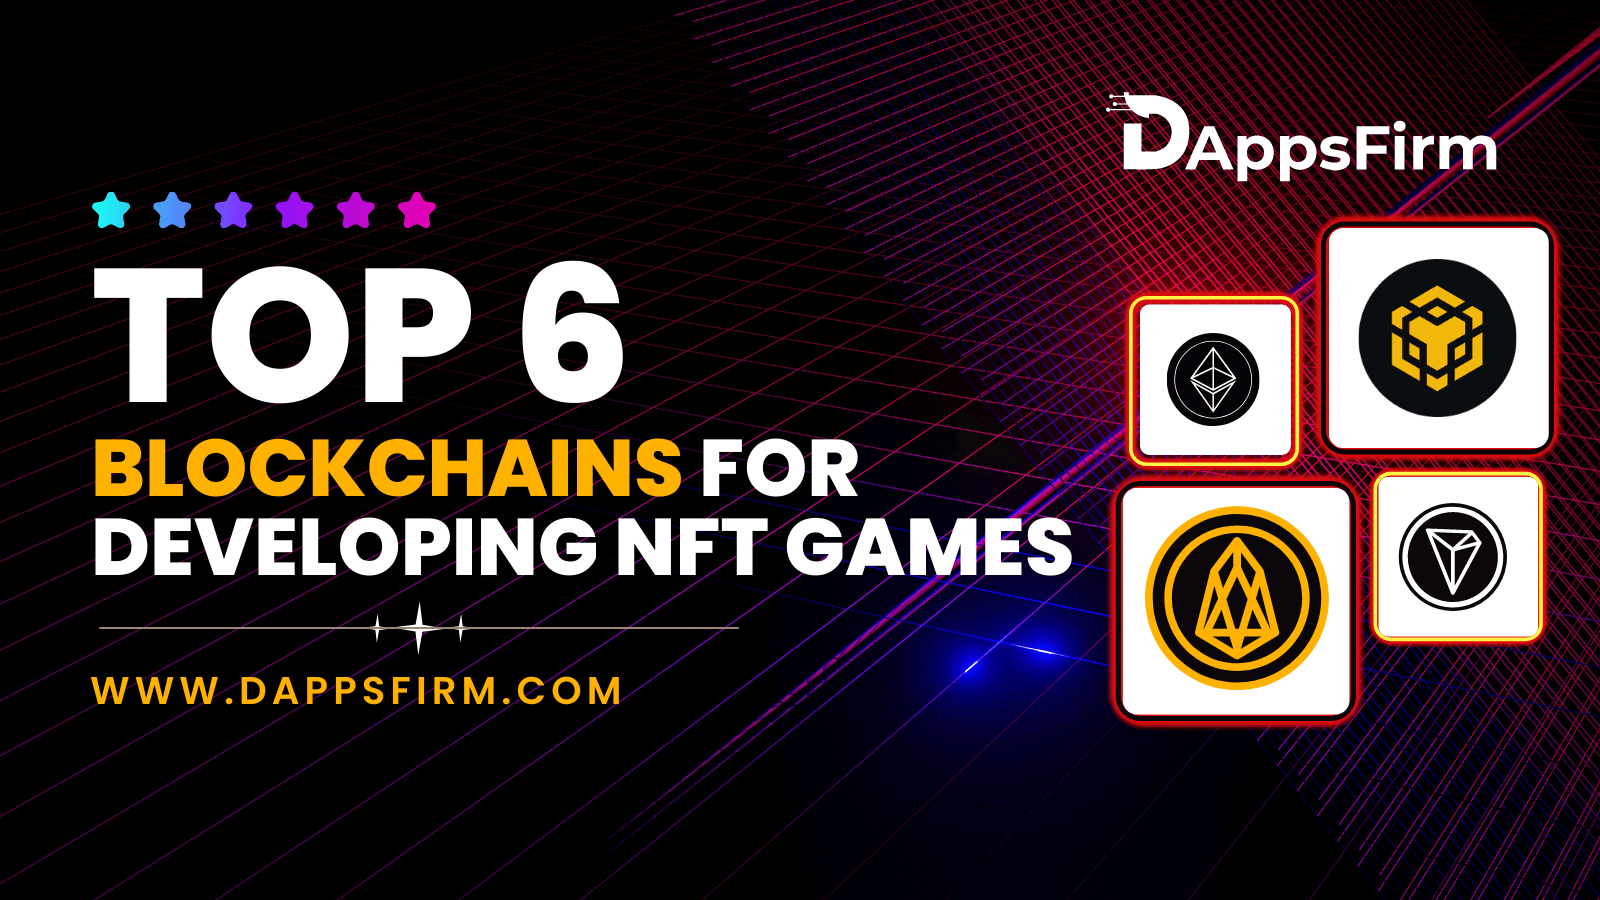 Top 6 Blockchain Networks For Developing NFT Games